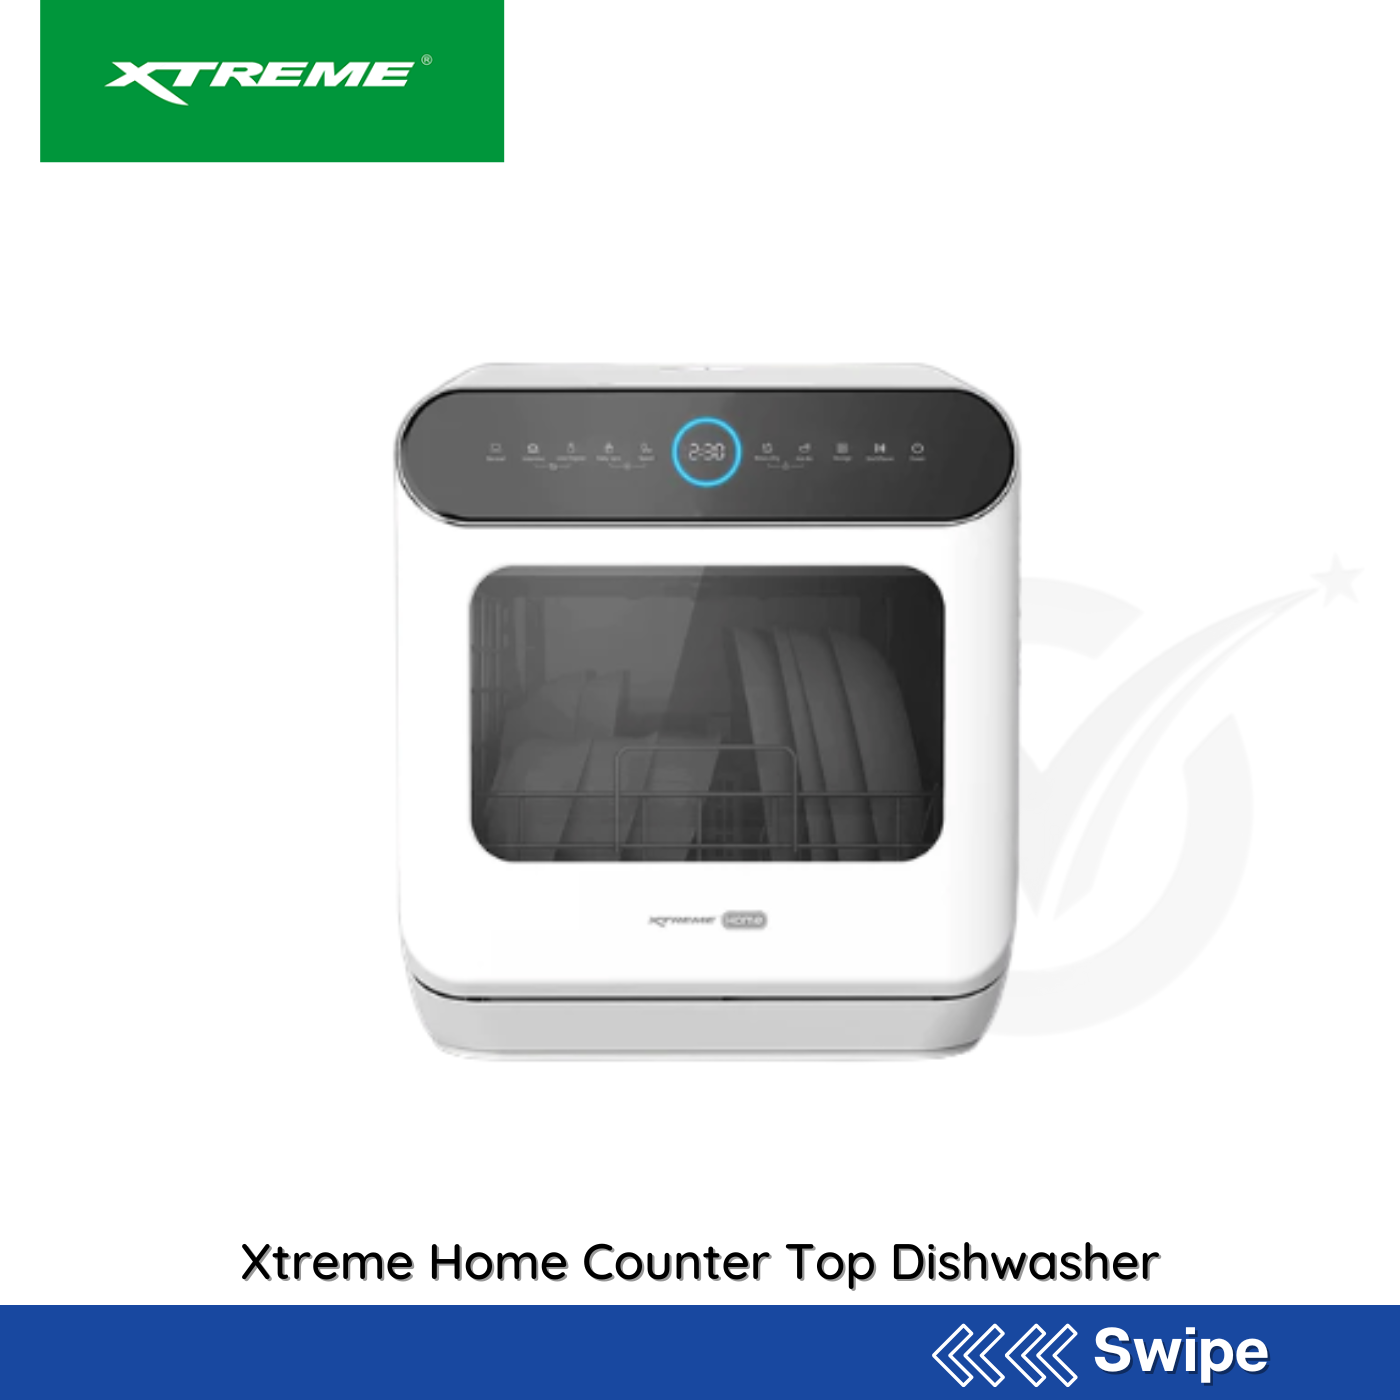 Xtreme Home Counter Top Dishwasher